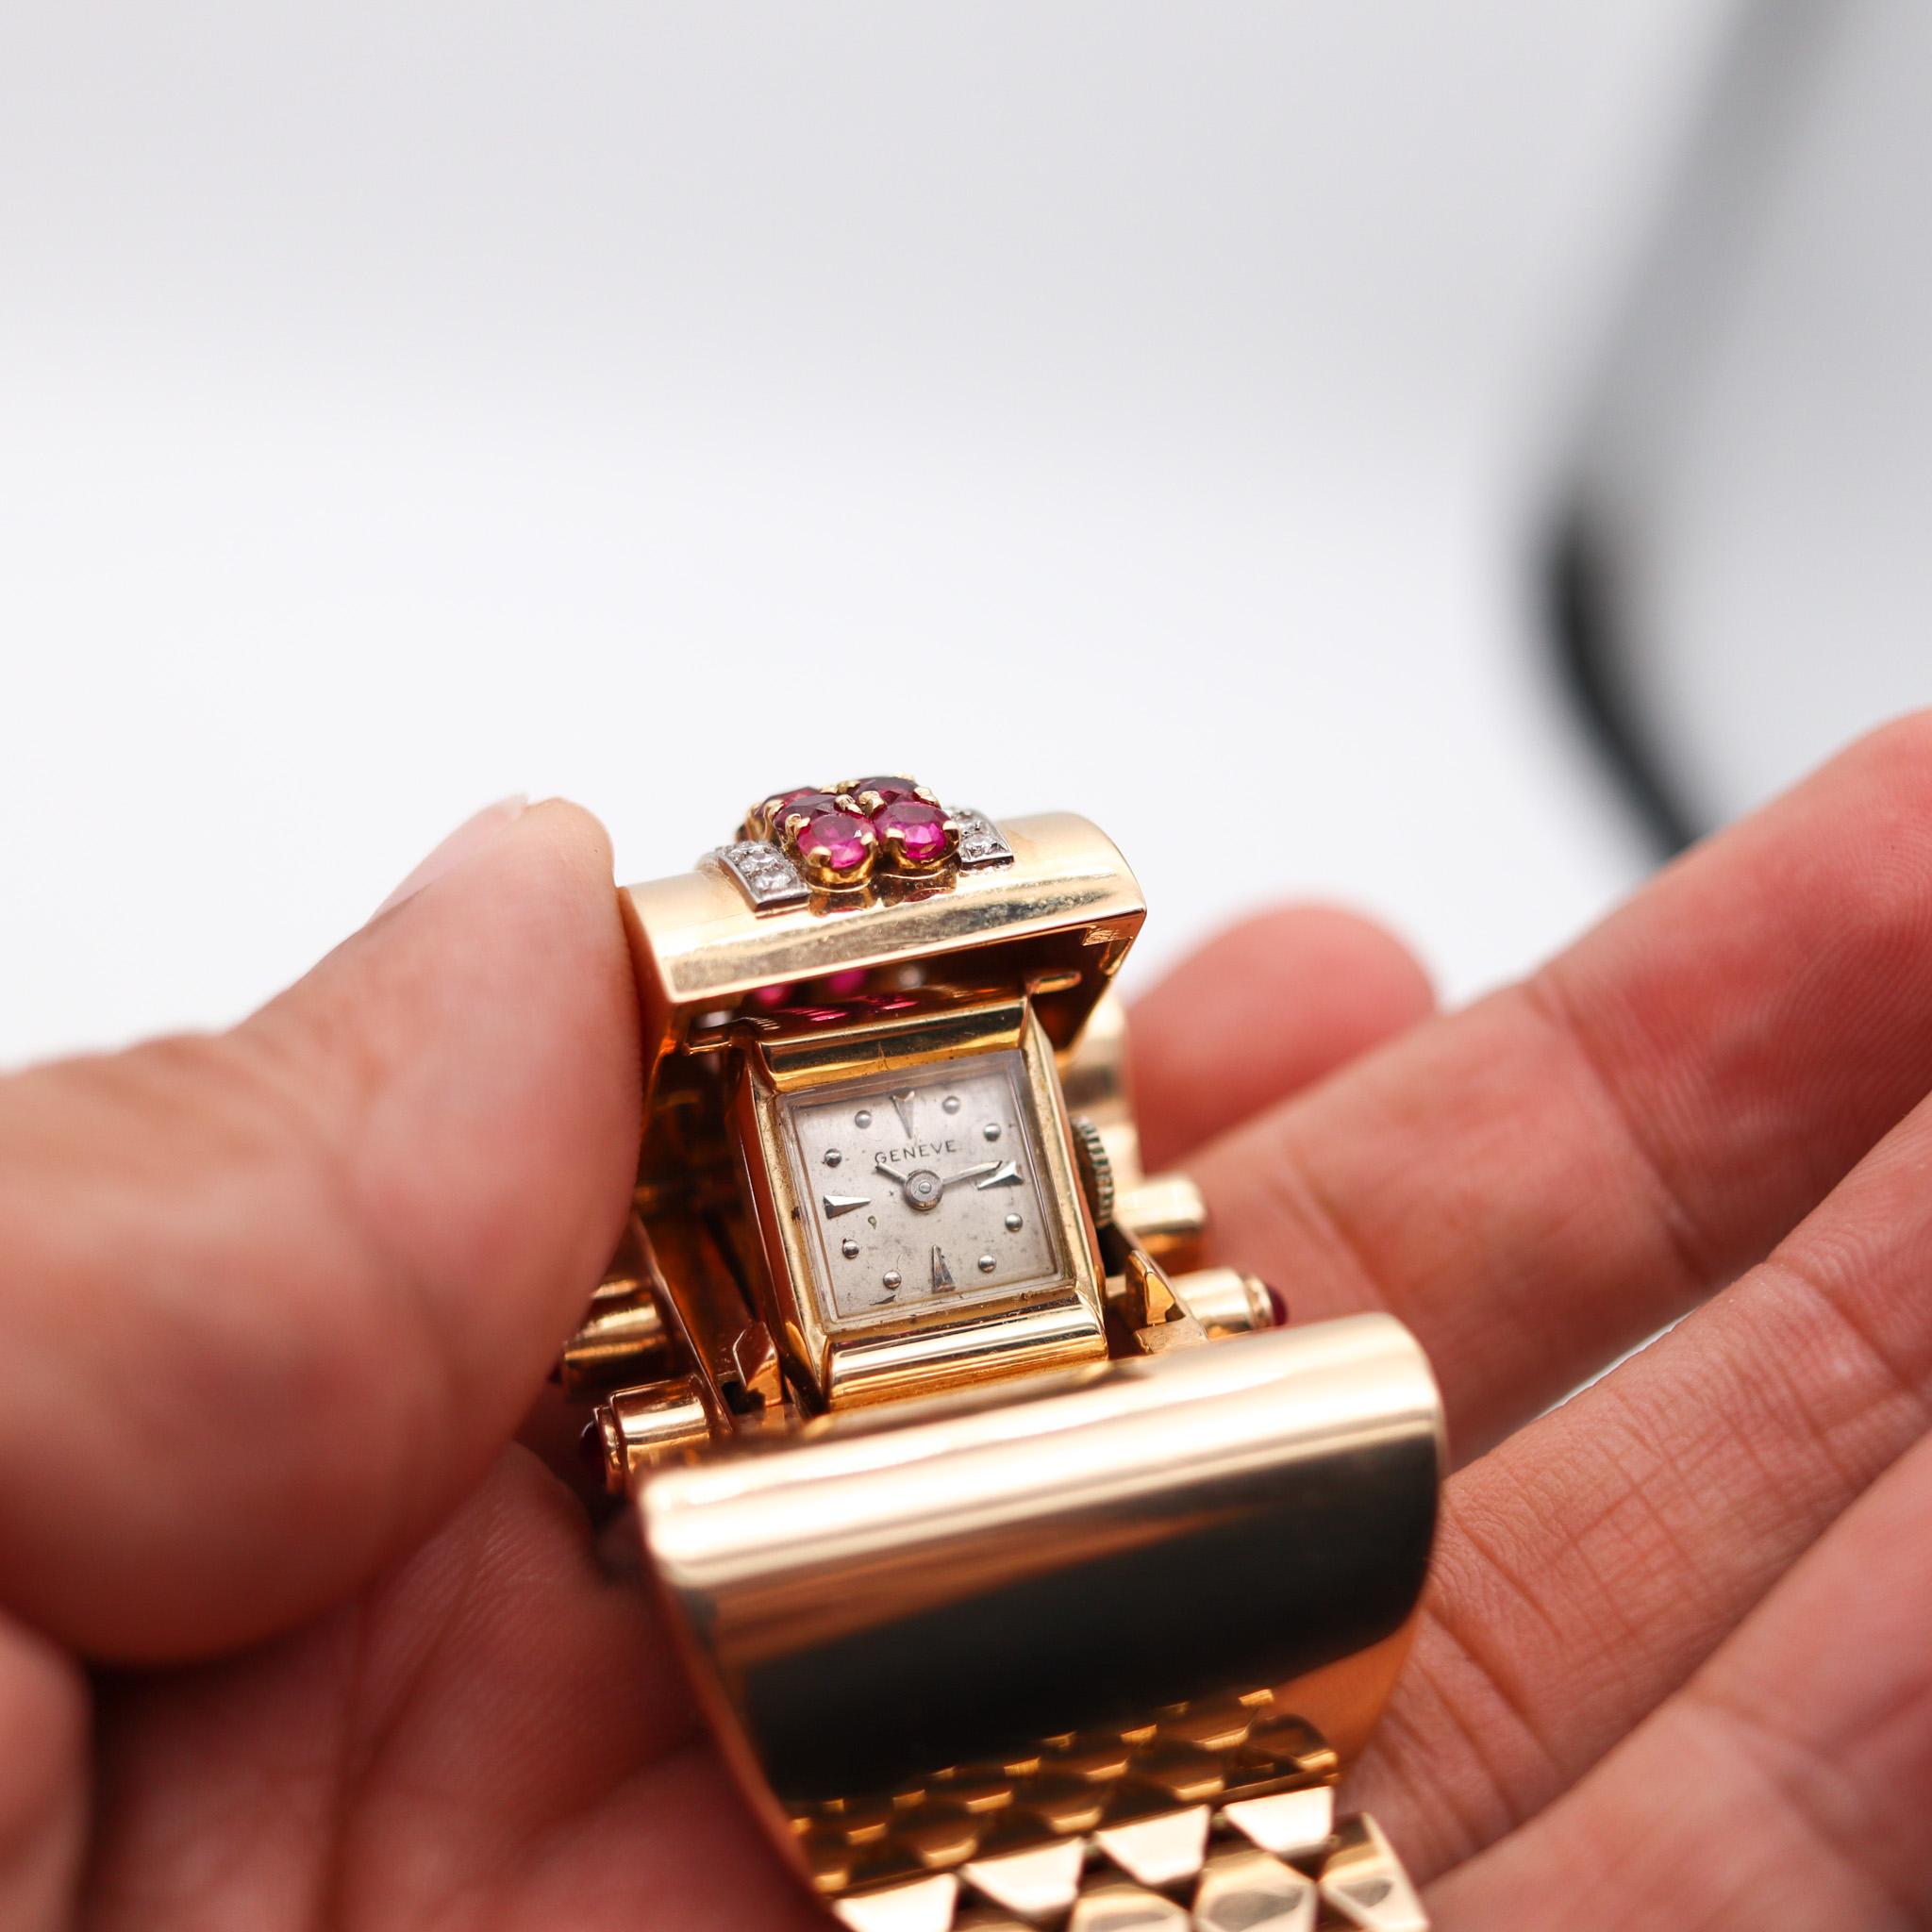 Deco Machine Age 1940 Wristwatch in 14k Gold with 5.54ctw Diamonds and Rubies For Sale 2